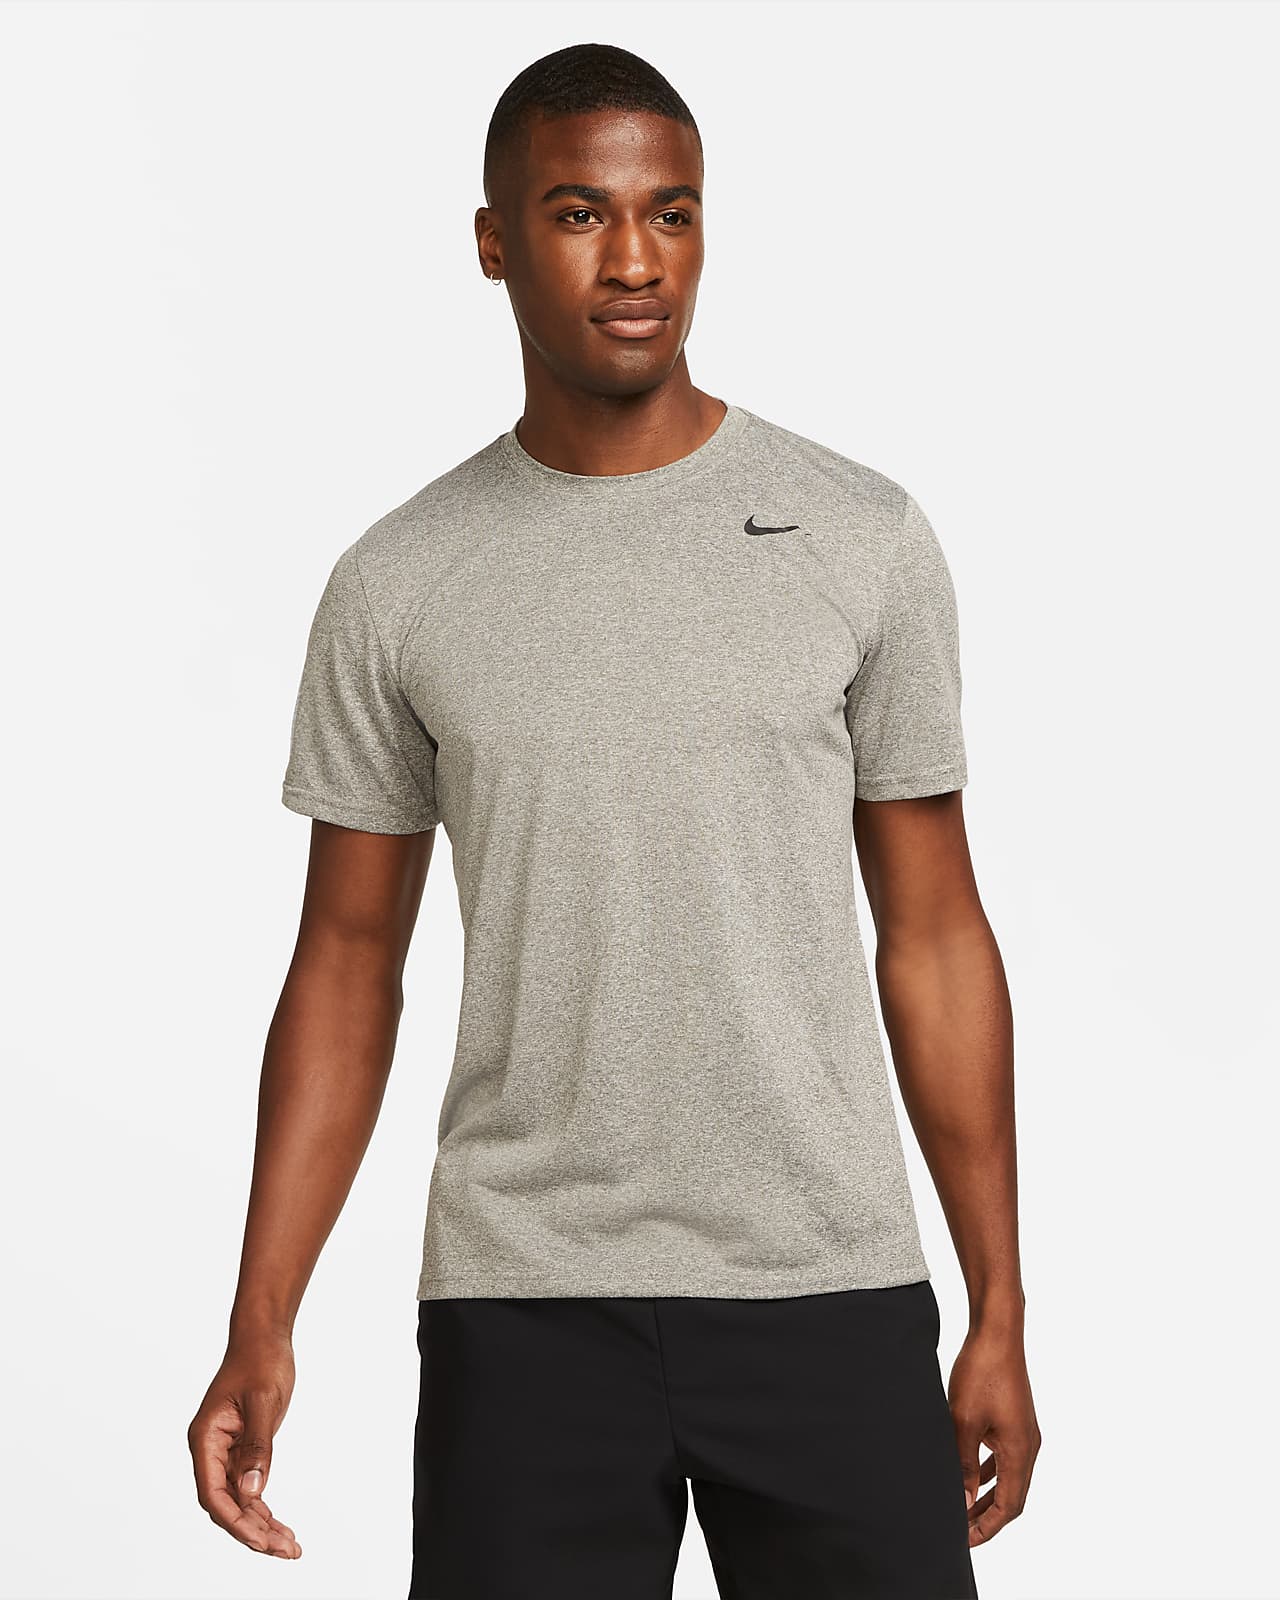 Buy > nike loose fit t shirts > in stock